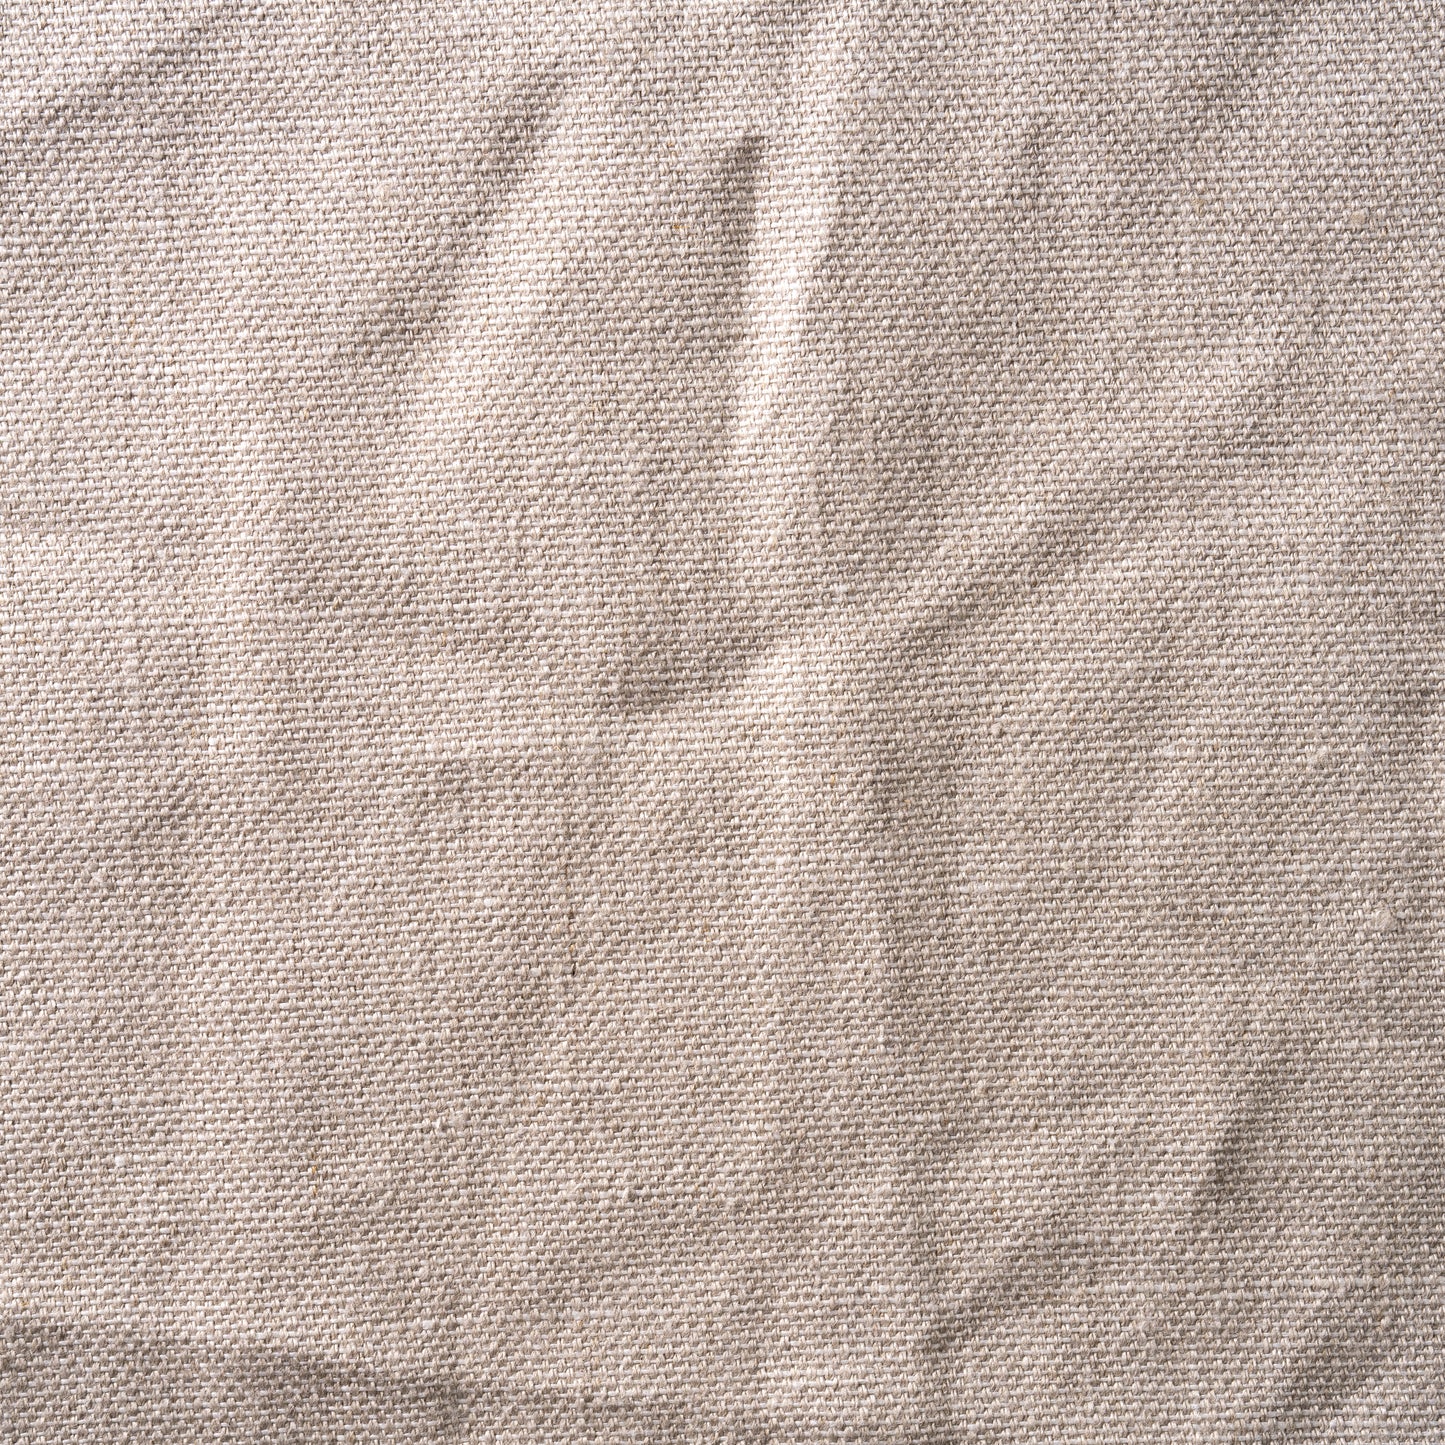 12 oz/sq yard 100% Upholstery/ Slipcover Weight Linen in Natural